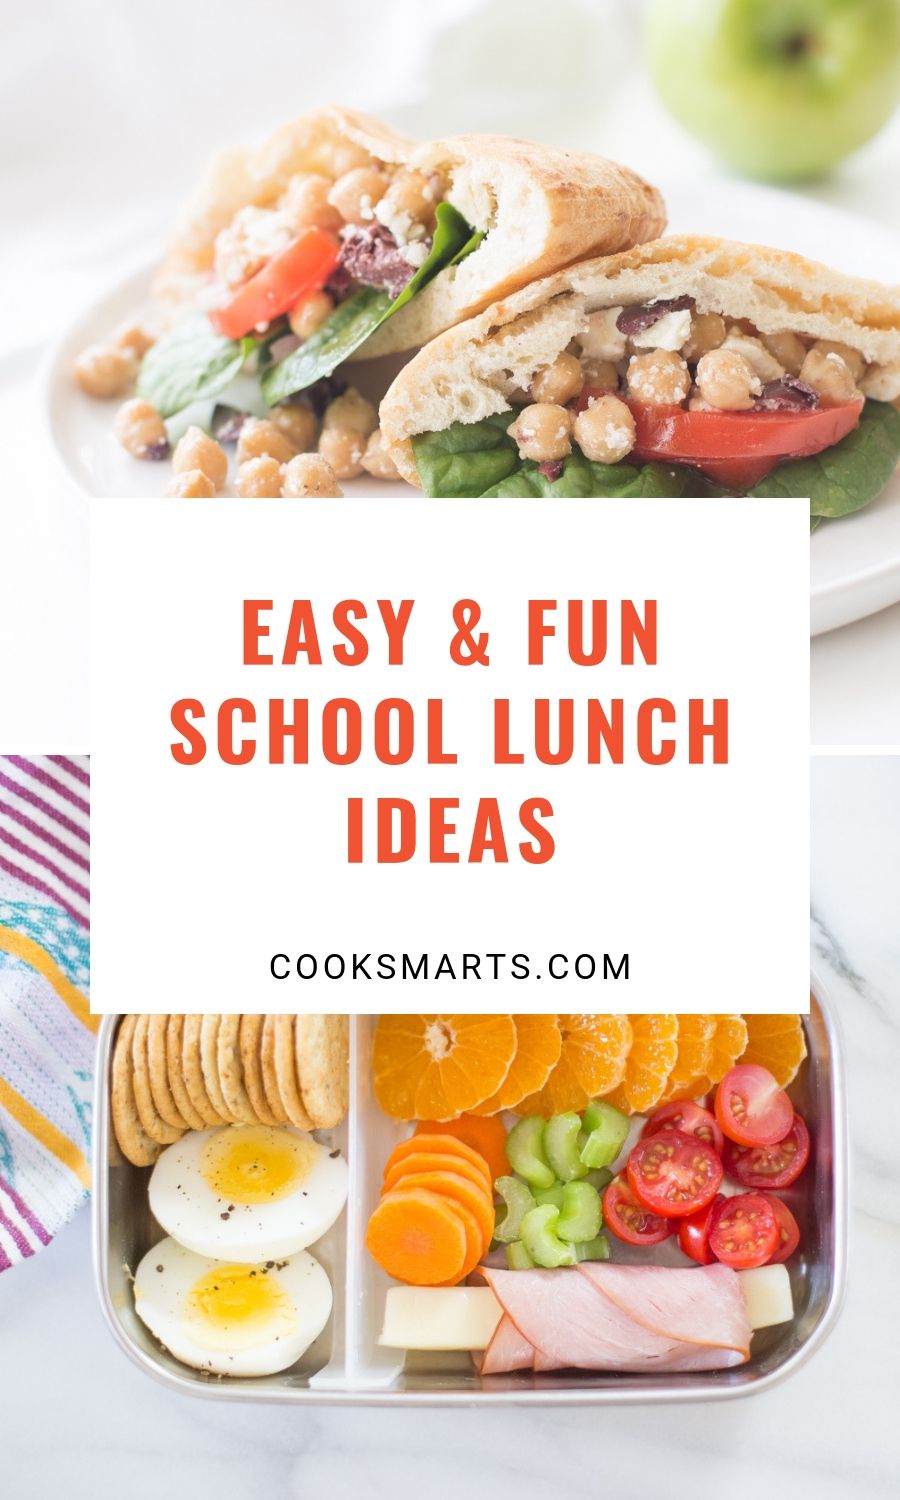 School Lunches Made Easy with Laura Fuentes | In the Kitchen with Cook Smarts Podcast